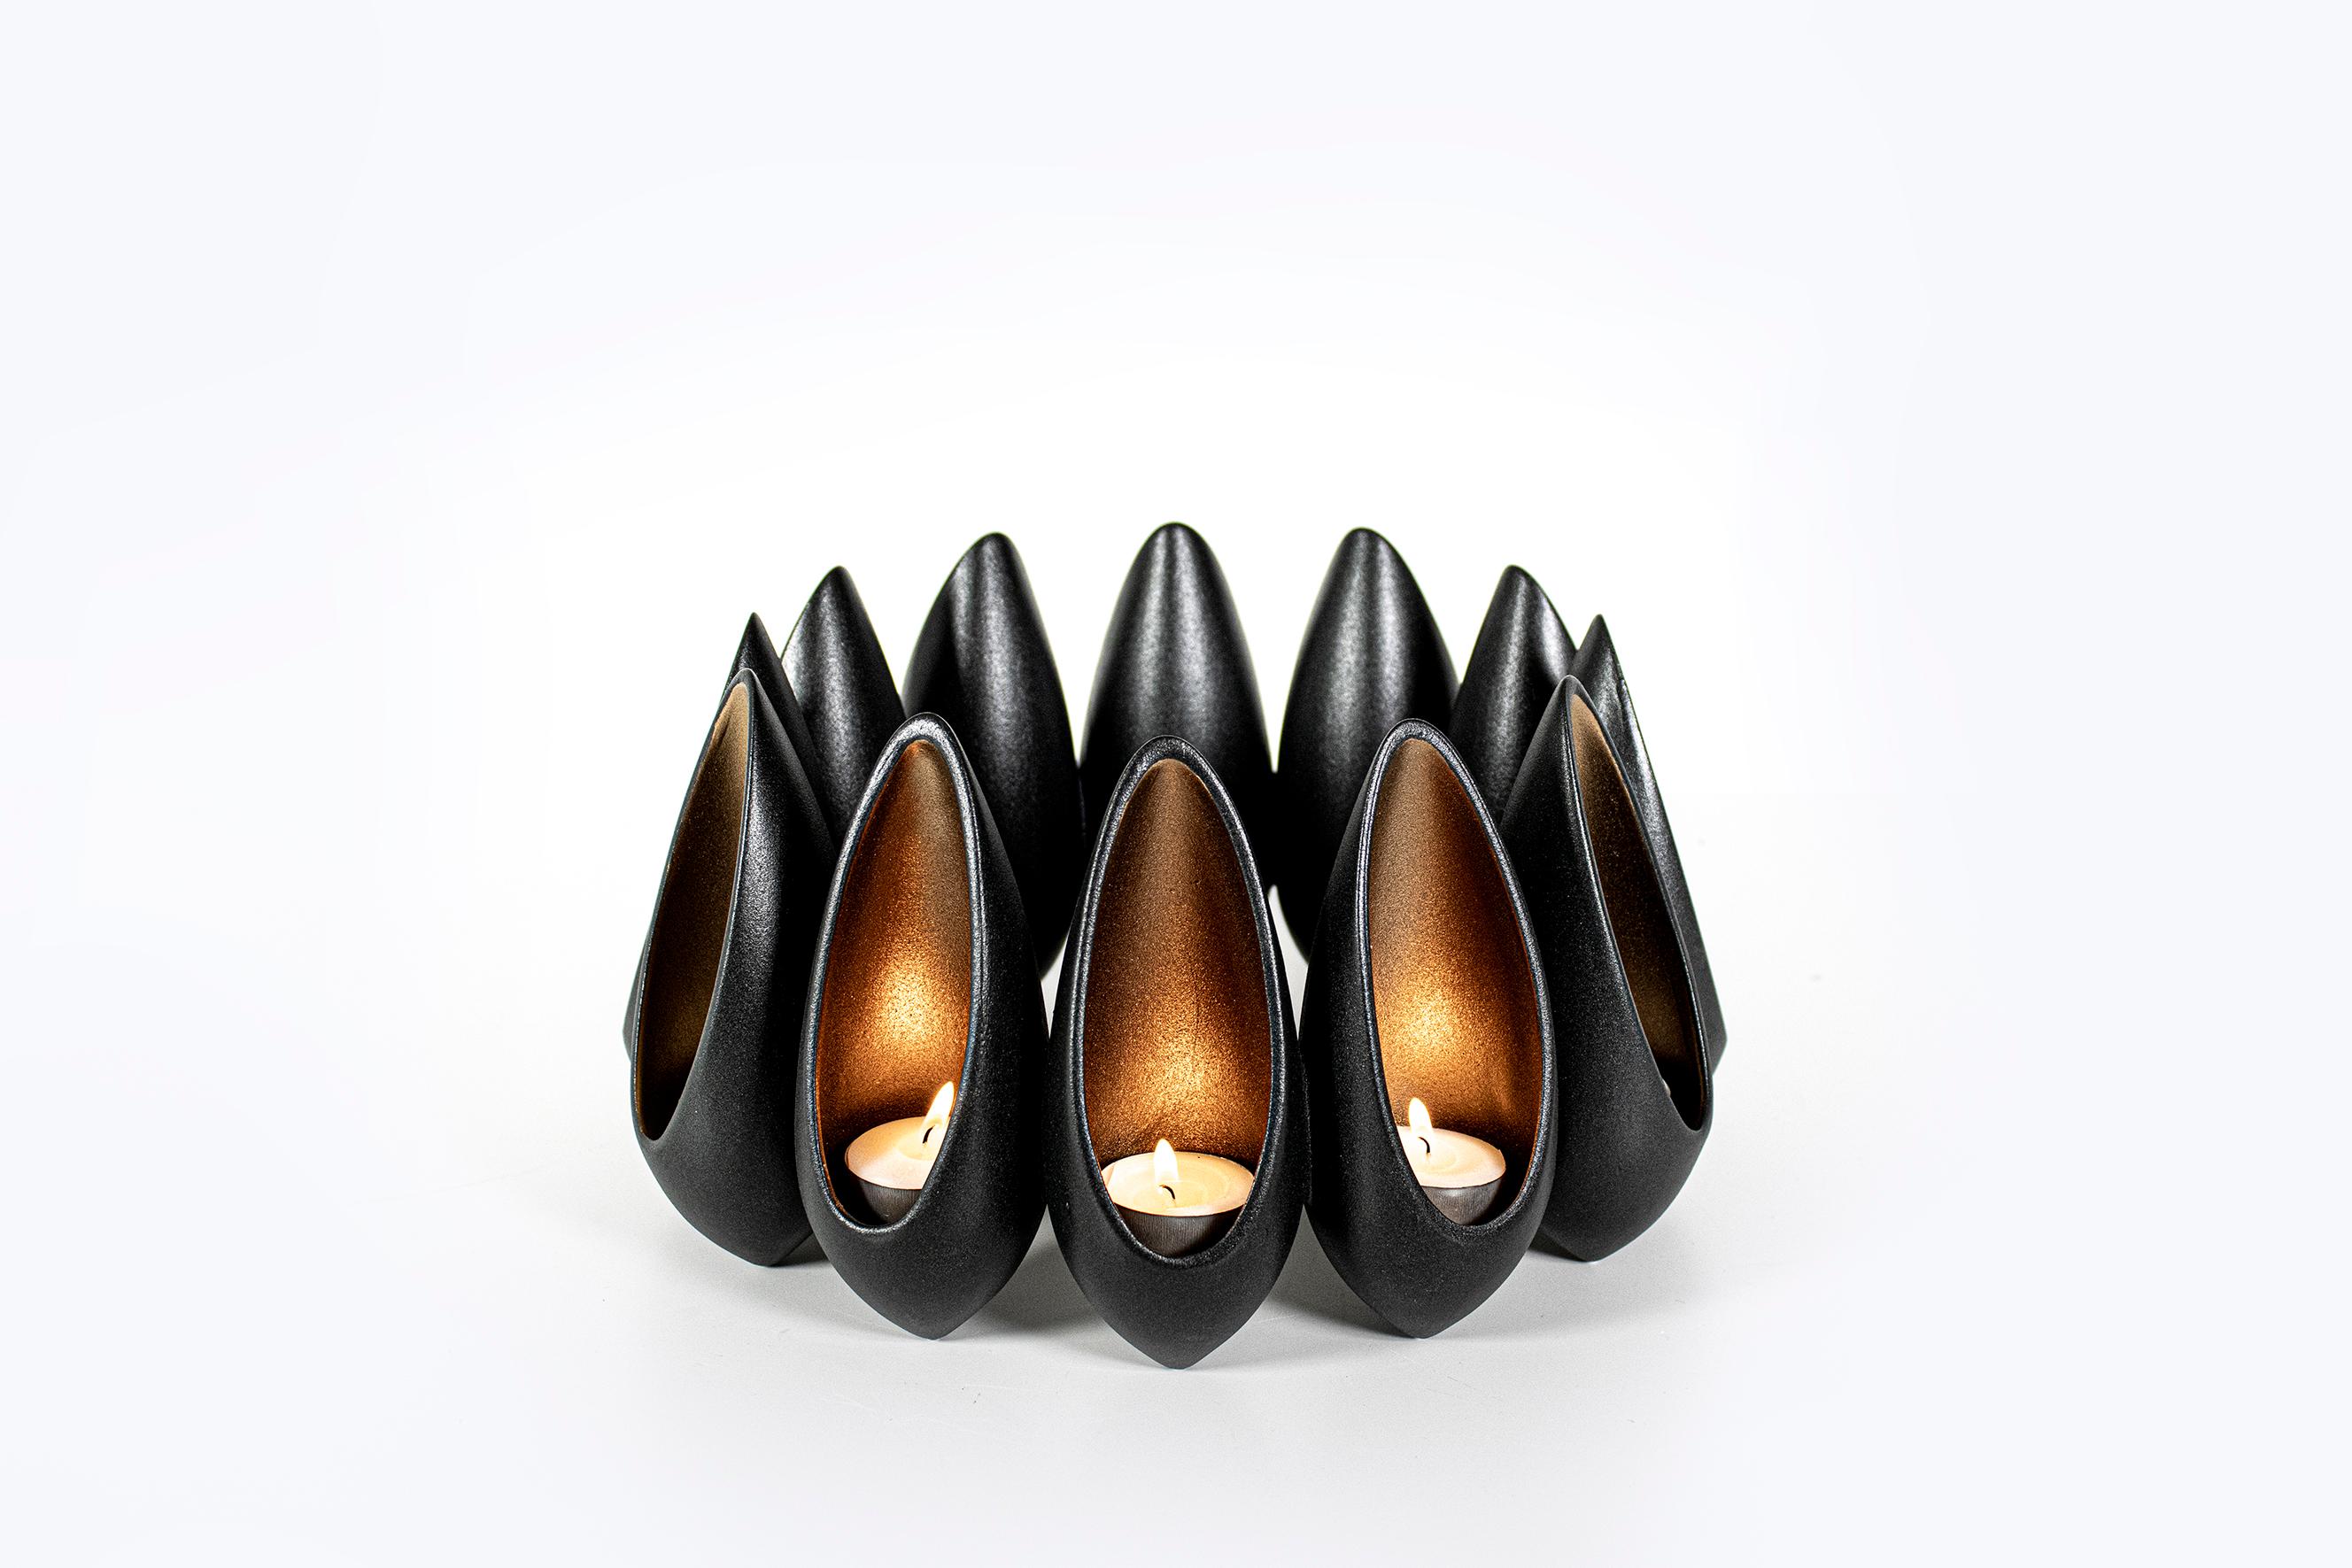 Experience the elegance and beauty of the Seed Pod Tealight Wreath, a unique centrepiece crafted by artisans in New Zealand. Part of the exclusive Seed Pod collection, this tealight wreath adds a modern twist to traditional dining room decor.
The